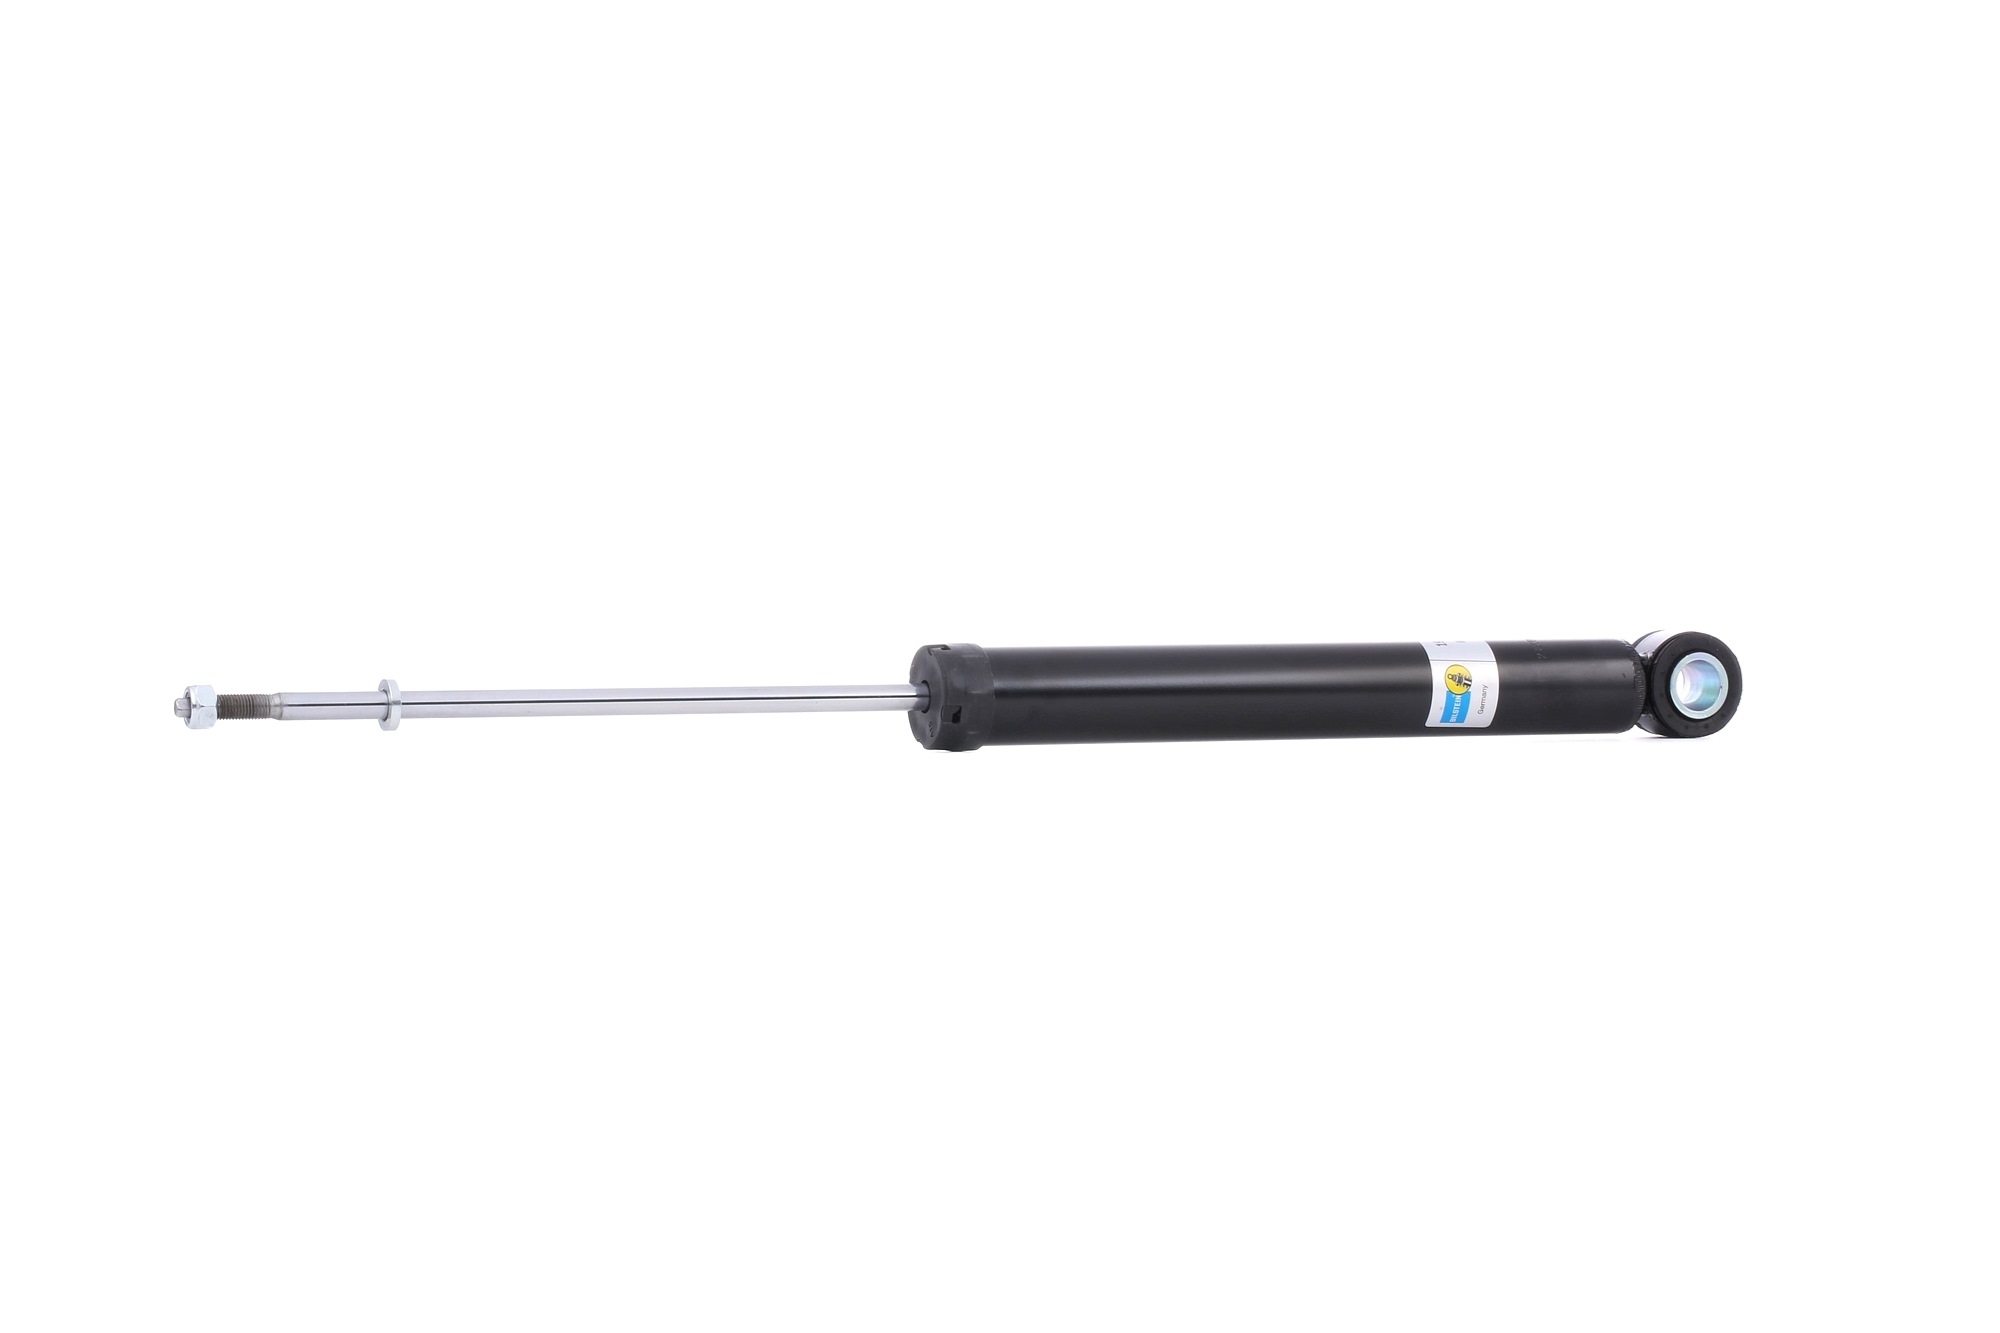 19-156545 BILSTEIN Shock absorbers OPEL Rear Axle, Gas Pressure, Twin-Tube, Absorber does not carry a spring, Bottom eye, Top pin